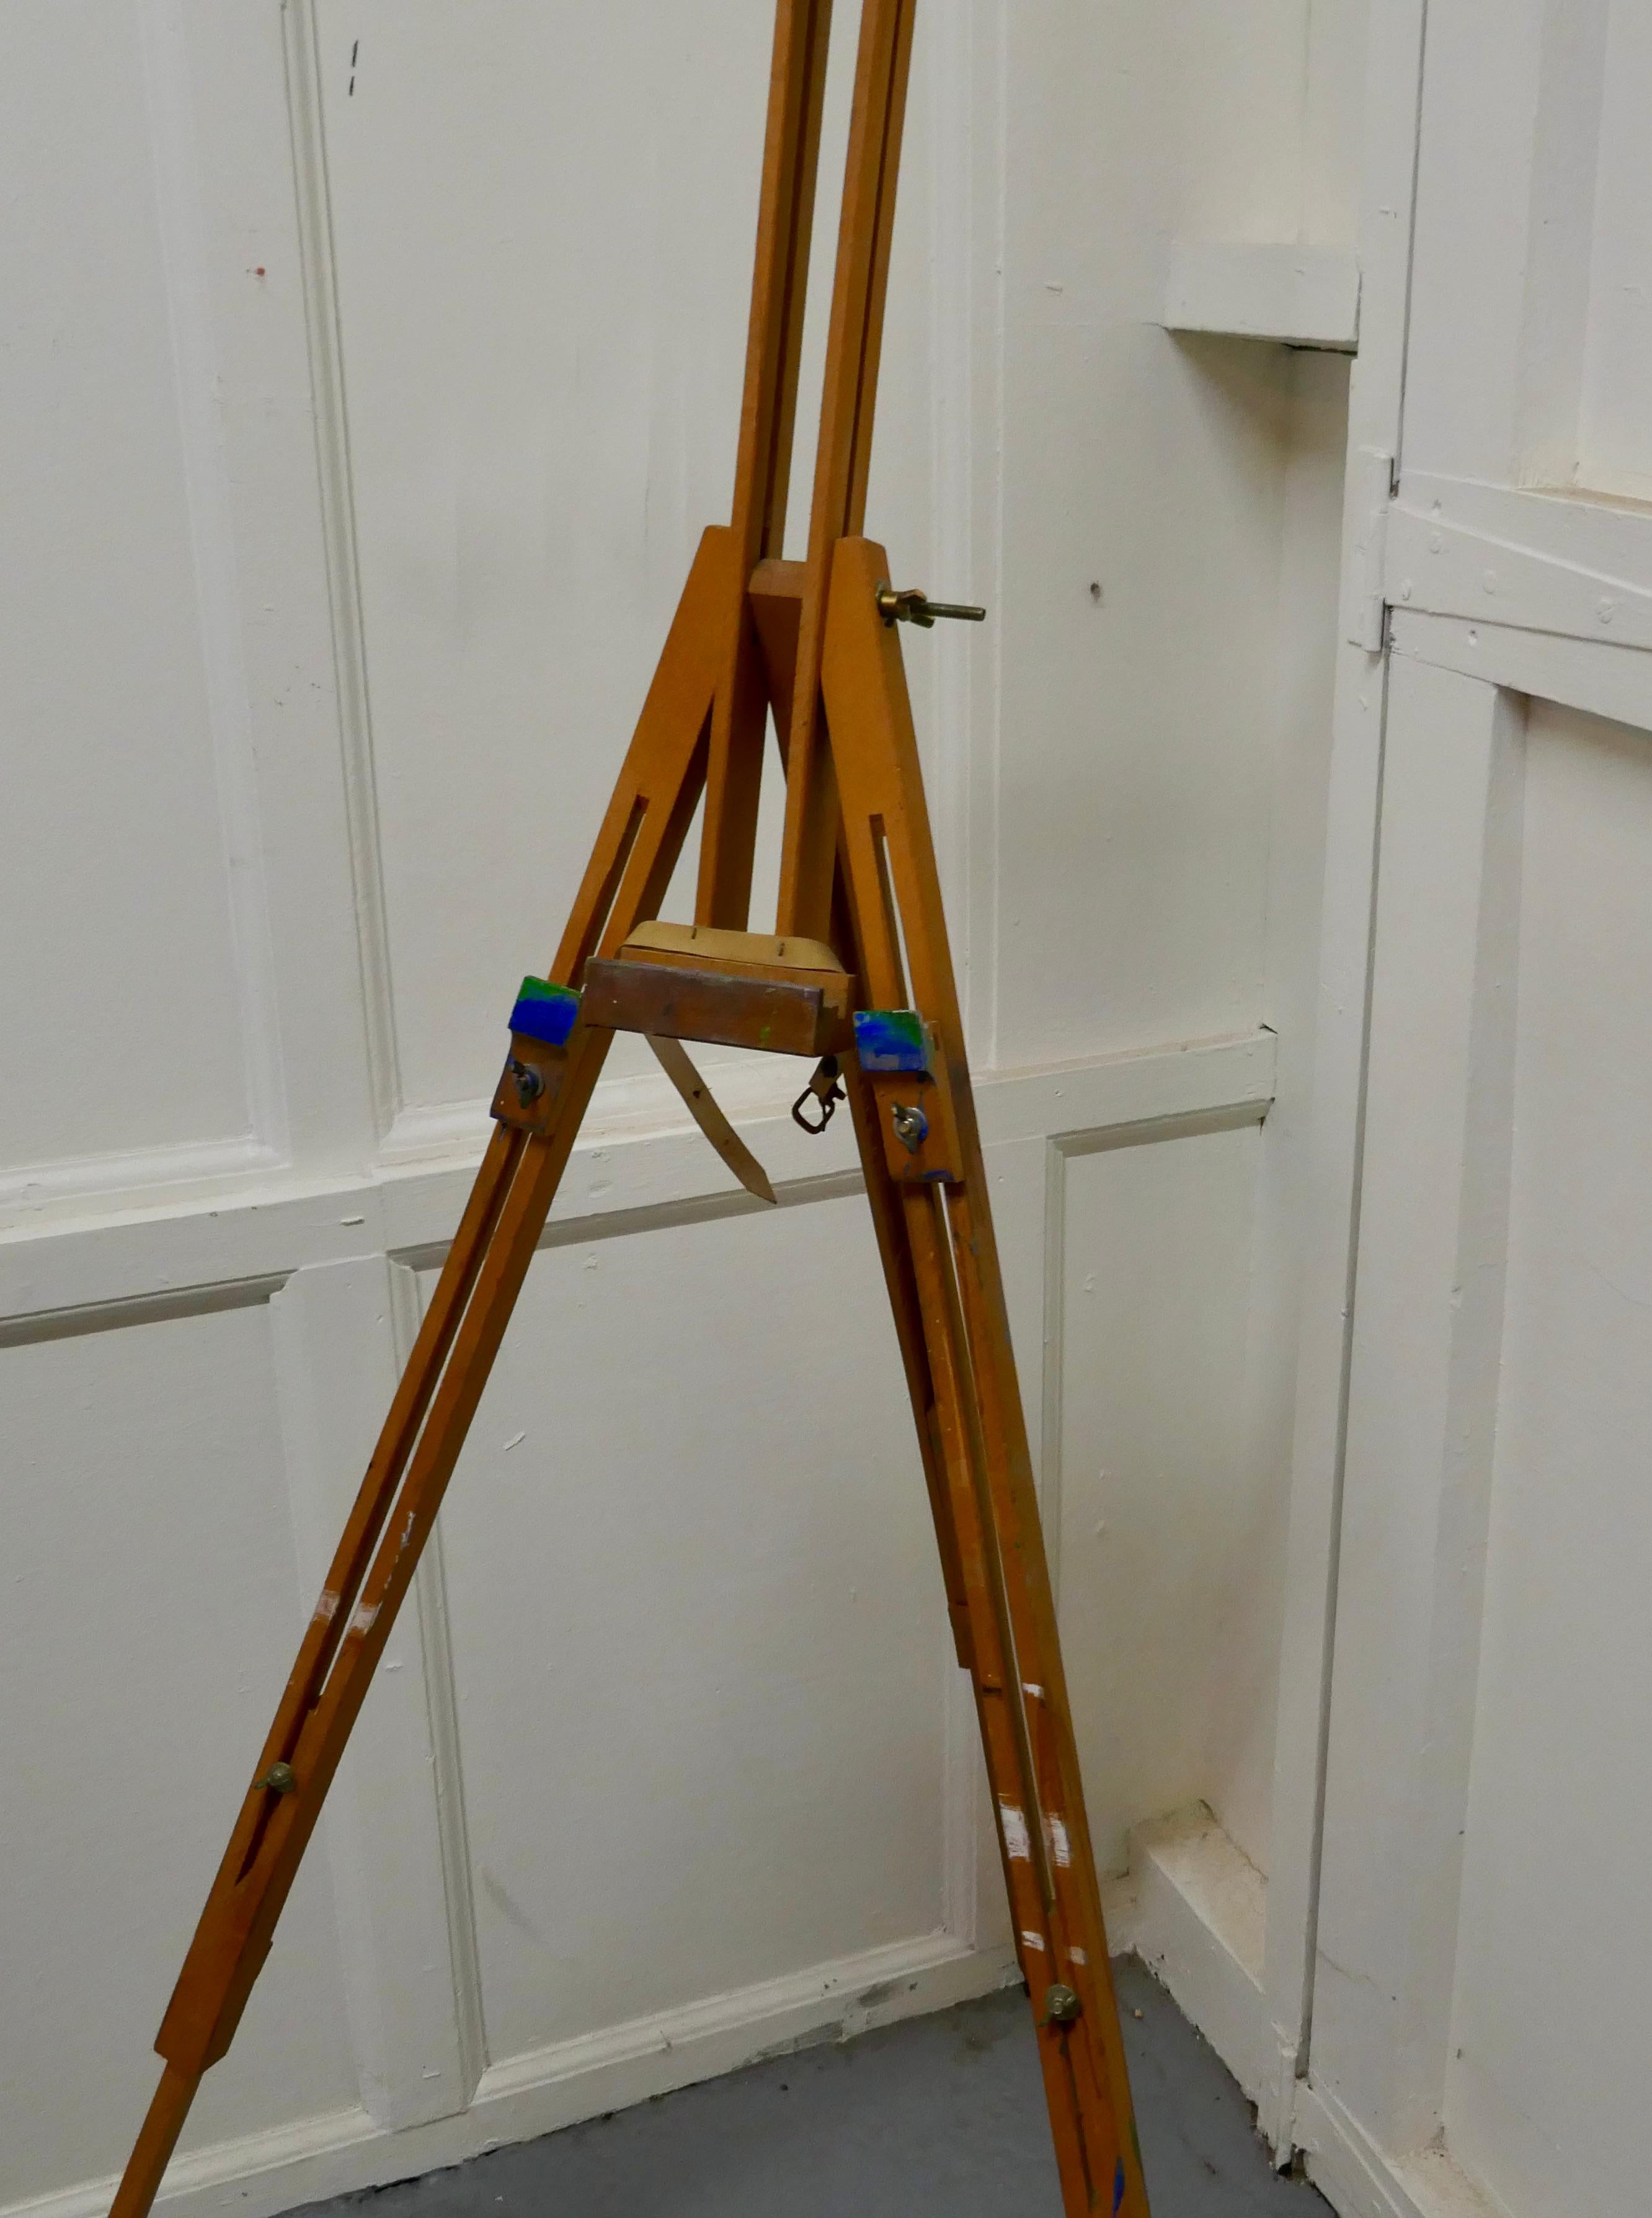 Beech portable folding Easel, 
 
The Easel height is adjustable and the picture stand can be raised and lowered according to requirements, and folds away for ease of Transport and storage
The Easel is in good used condition there are a few